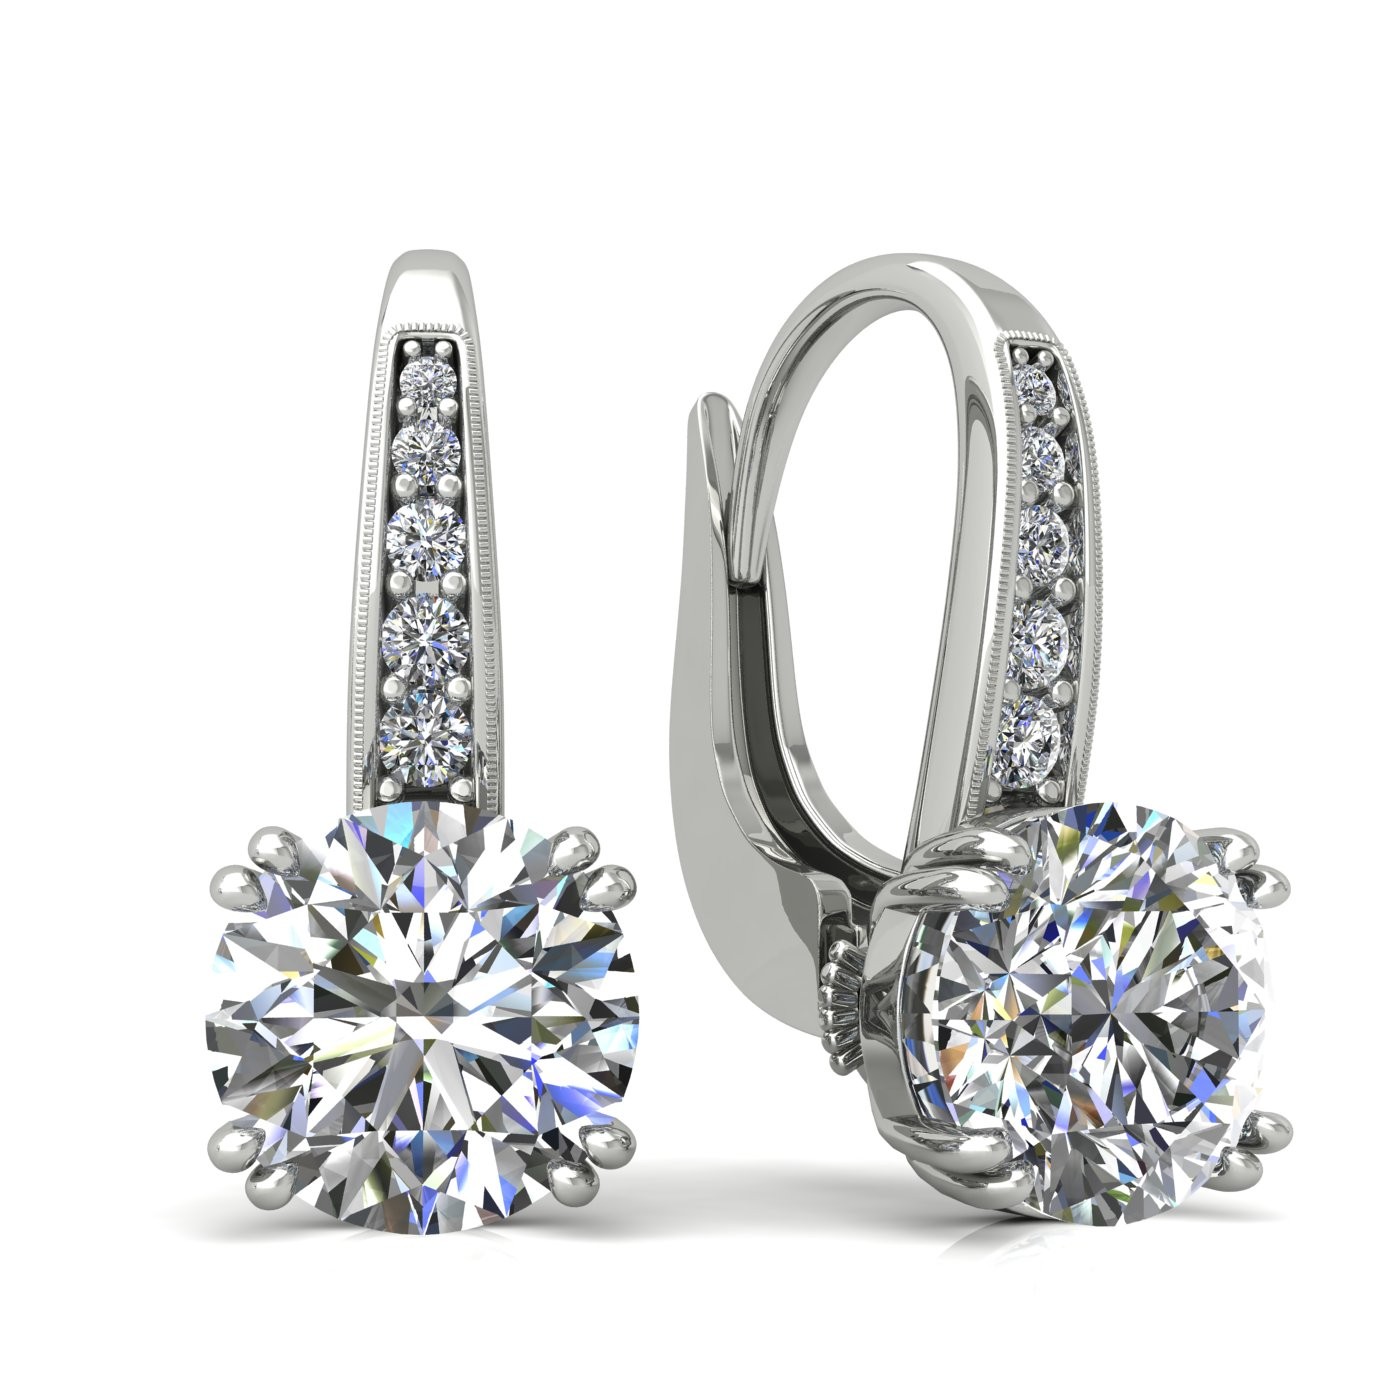 18k white gold  0,3 ct each (0,6 ct tcw) 8 prongs round shape leverback diamond earrings Photos & images